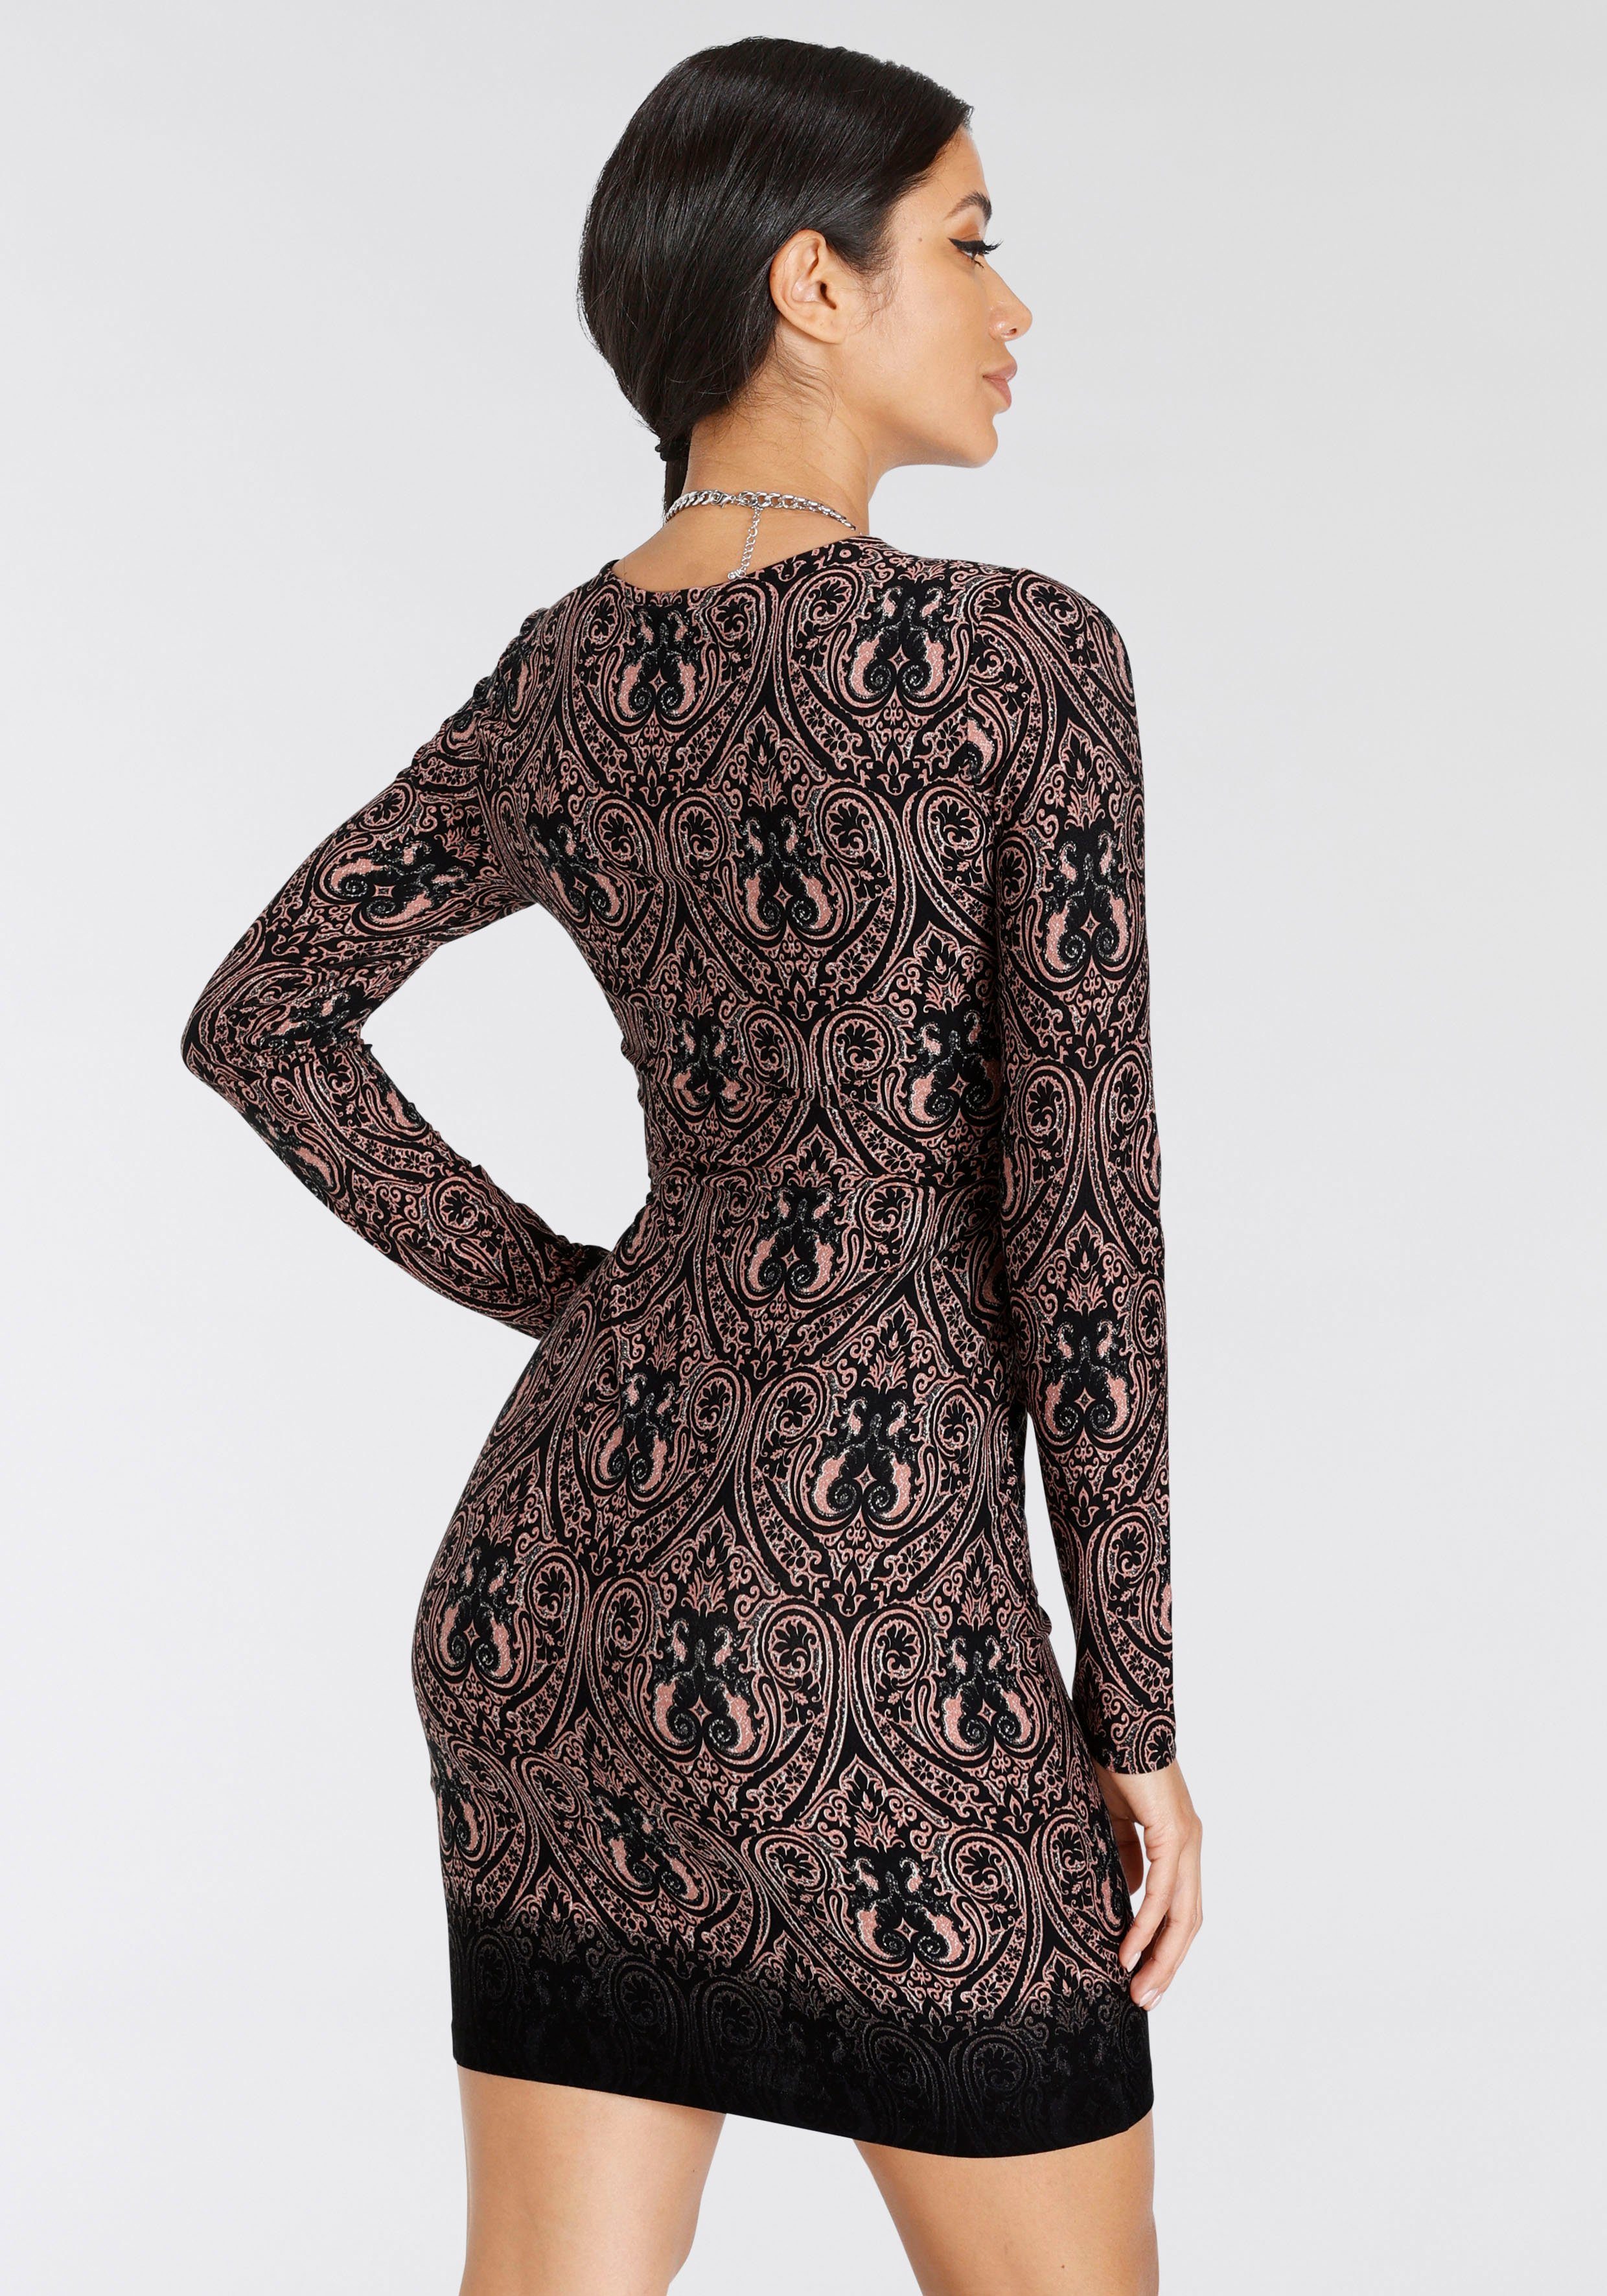 und Cut-Out mit Melrose Paisley-Muster Jerseykleid